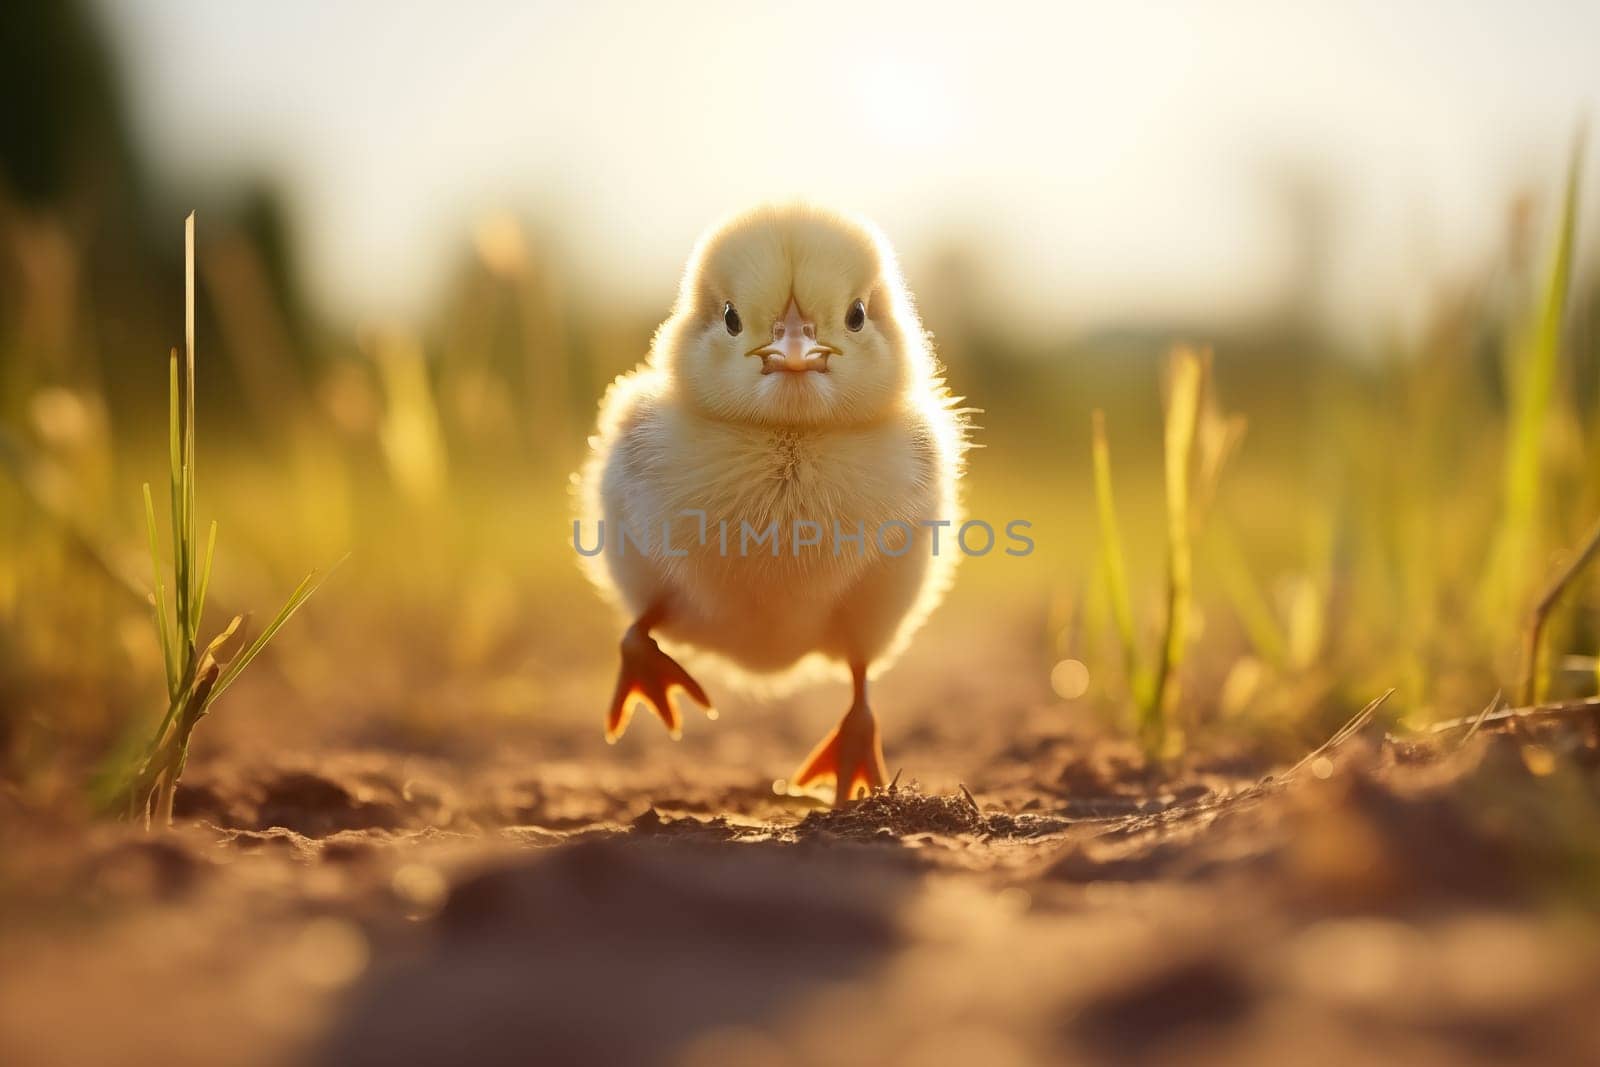 Yellow Little Chick outdoors by dimol